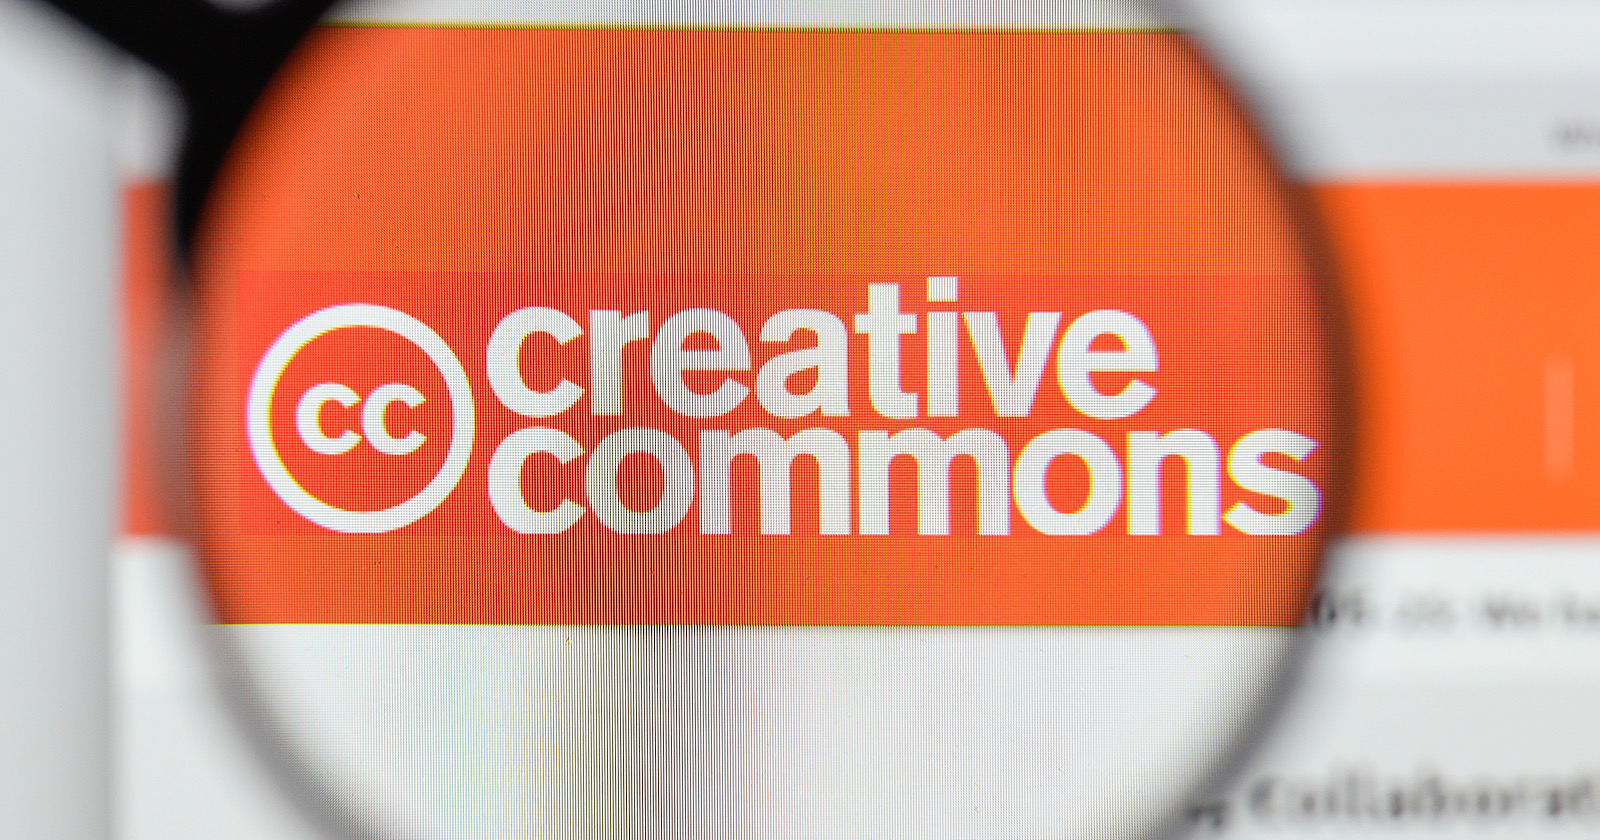 wordpress saves creative commons search engine from shutting down via sejournal mattgsouthern